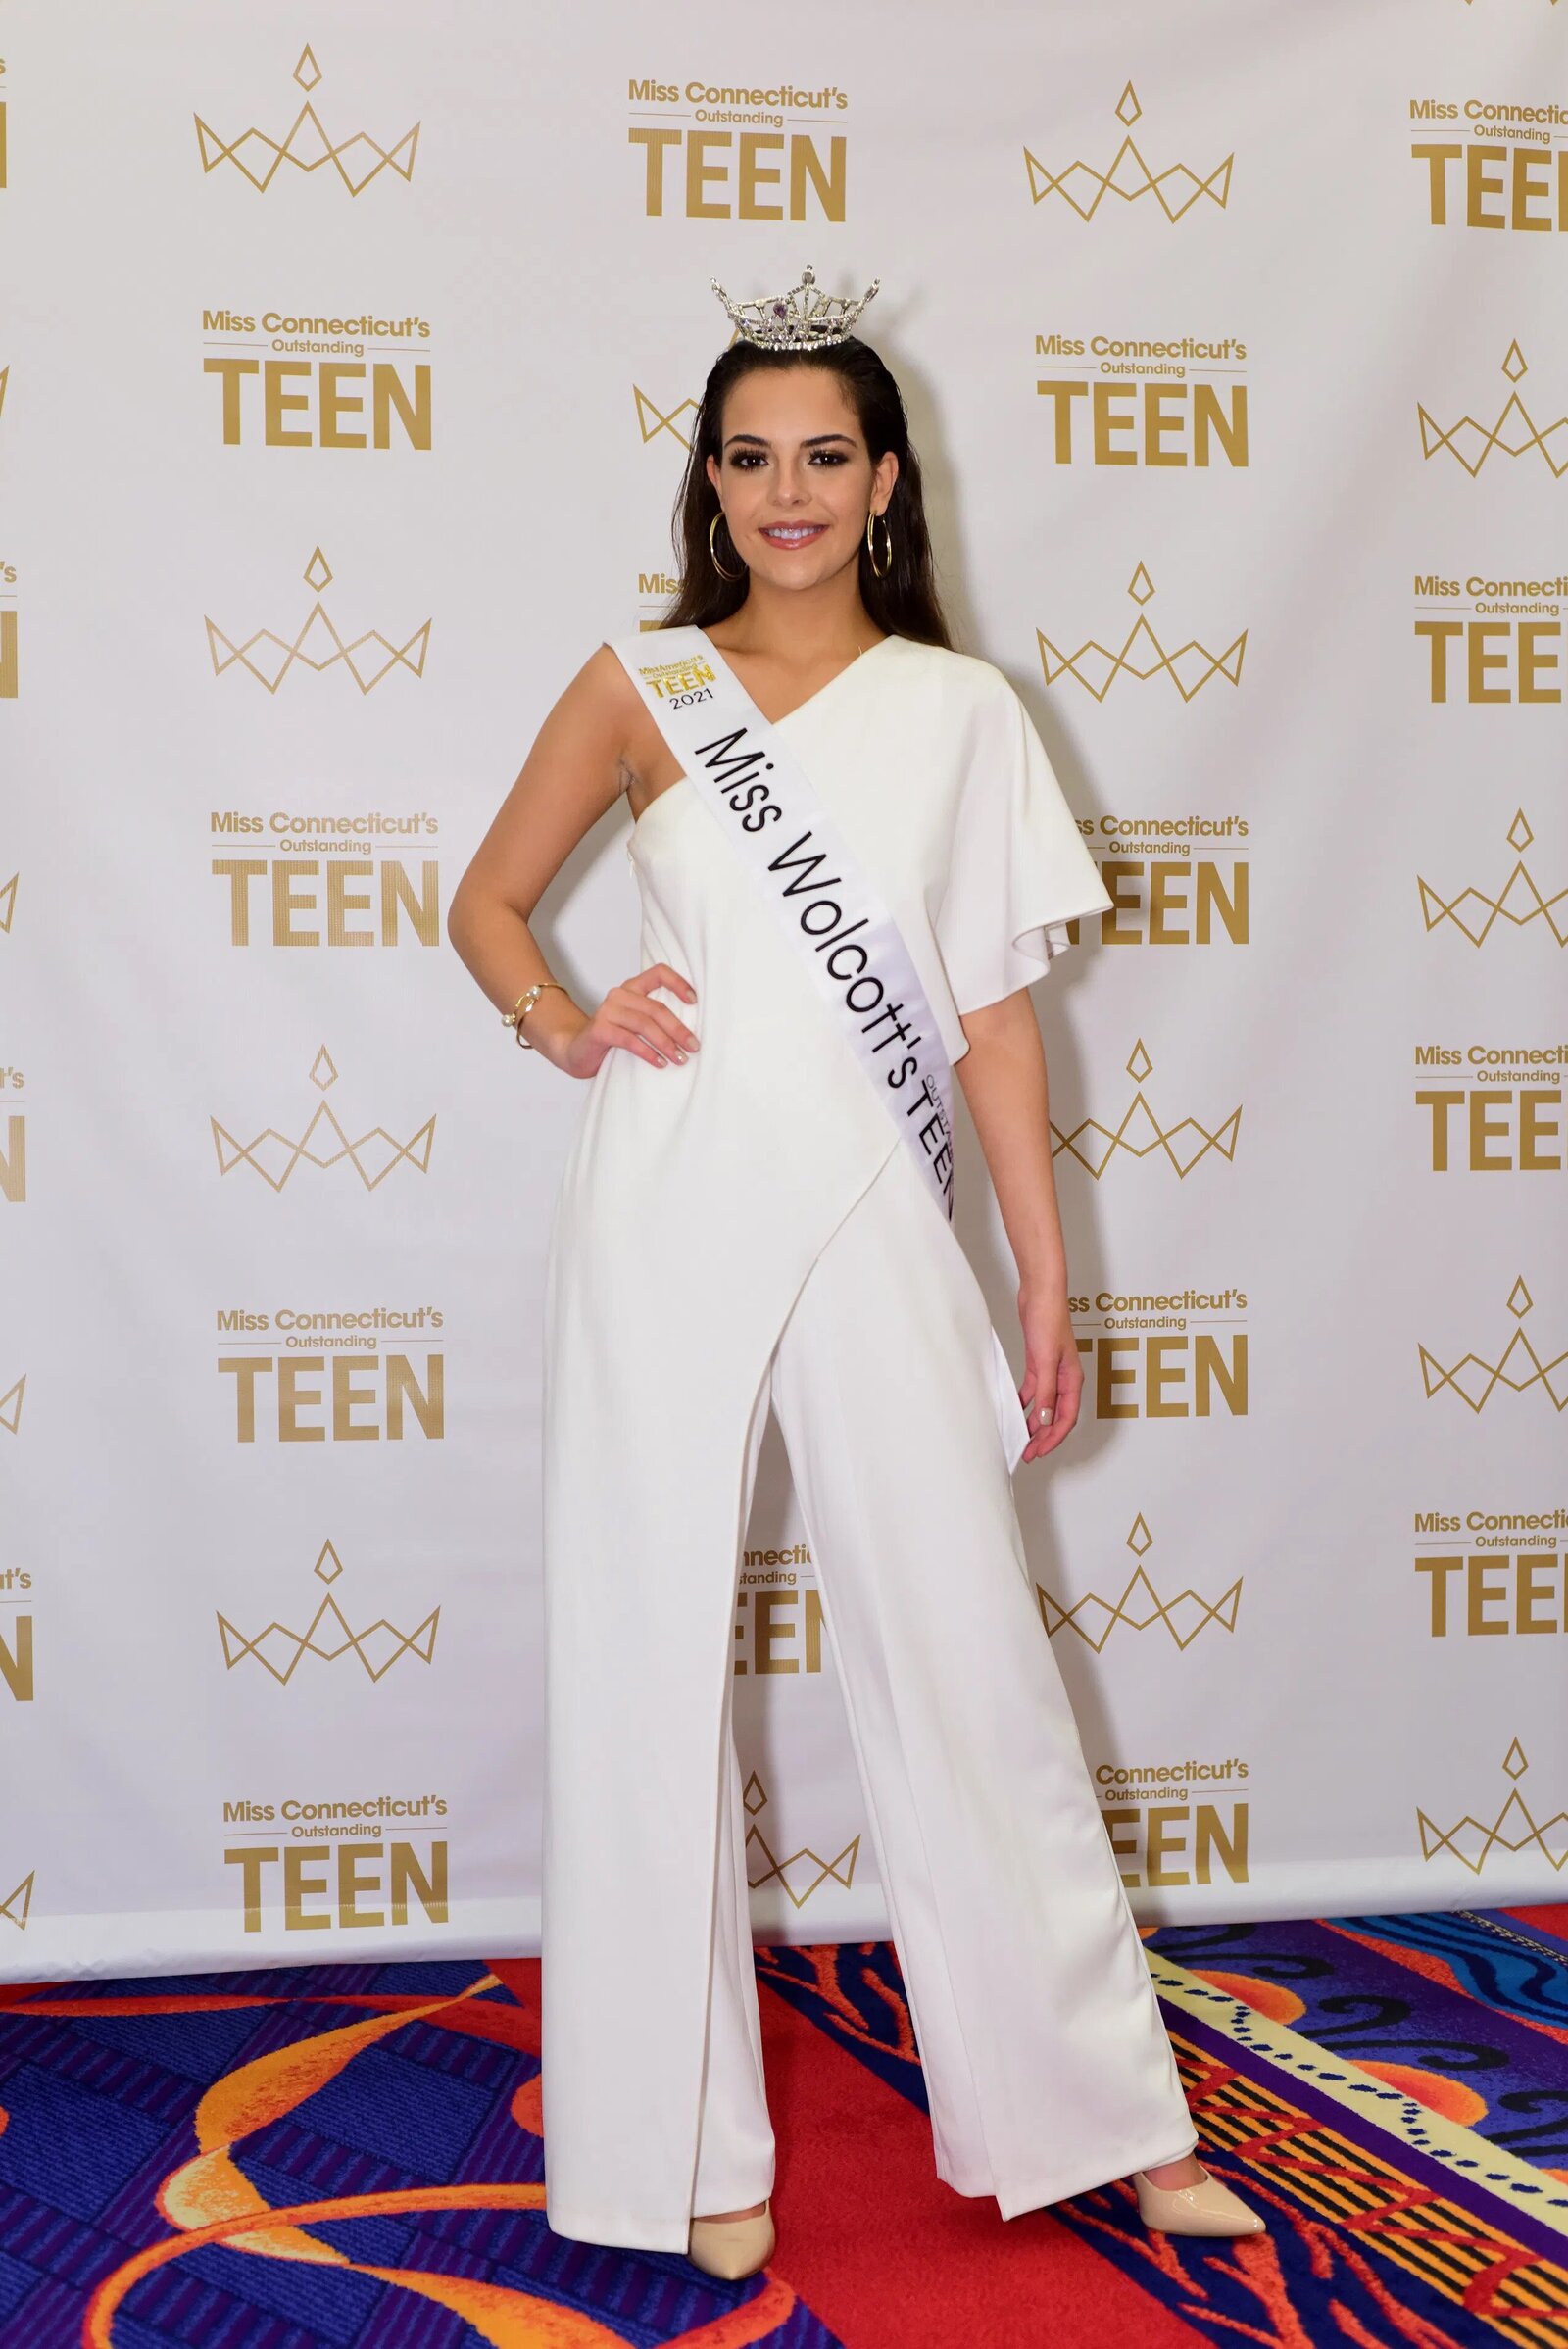 pageant-and-runway-spray-tans-glotique-connecticut-9